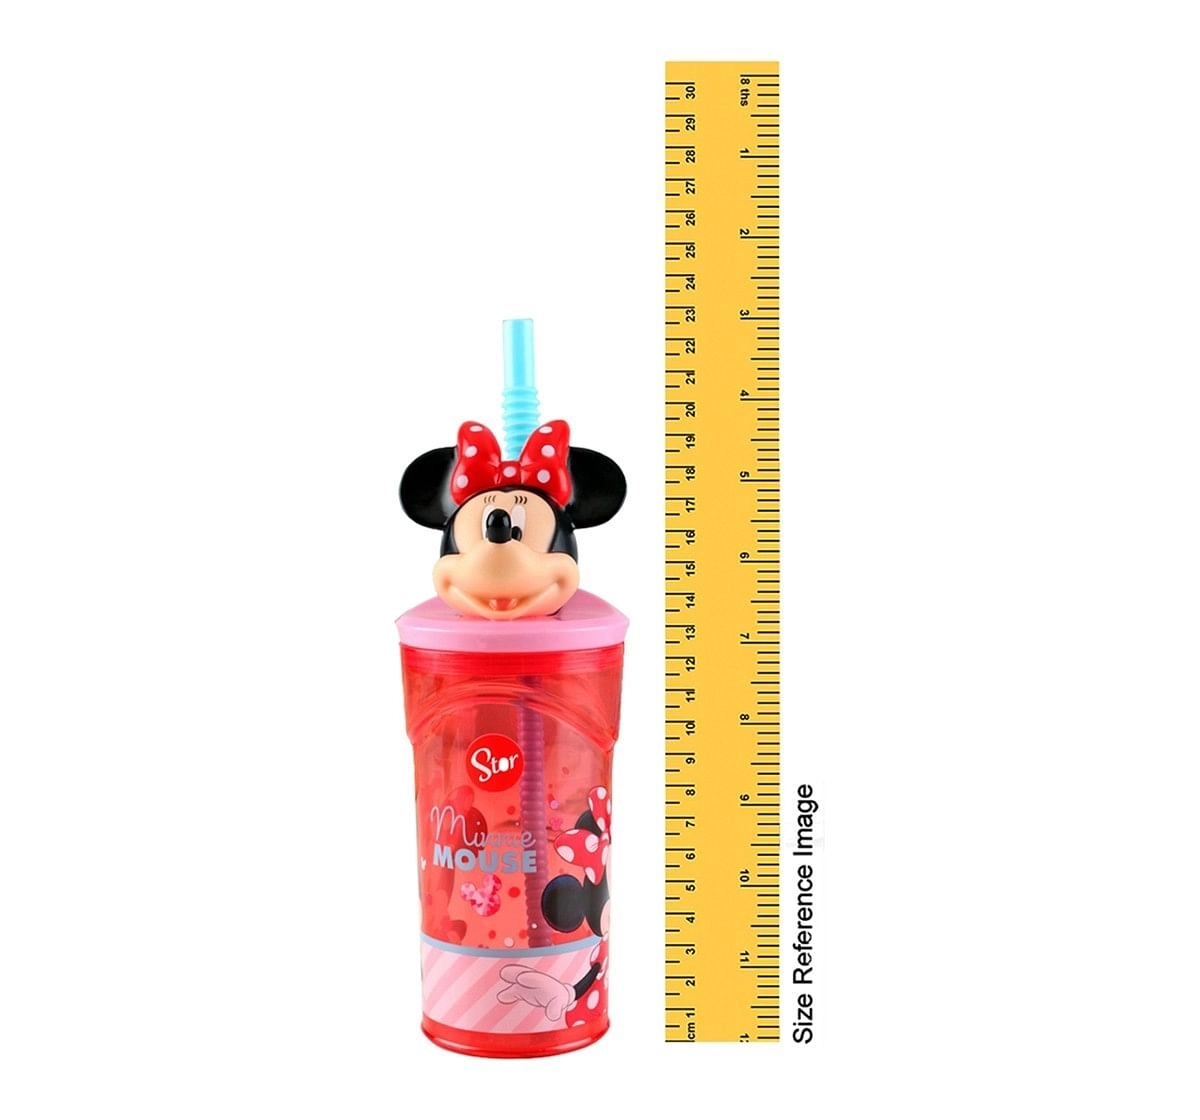 Disney Story 3D Figurine Tumbler Minnie Electric Doll,Water Bottles & Sipper for age 3Y+, 360ml